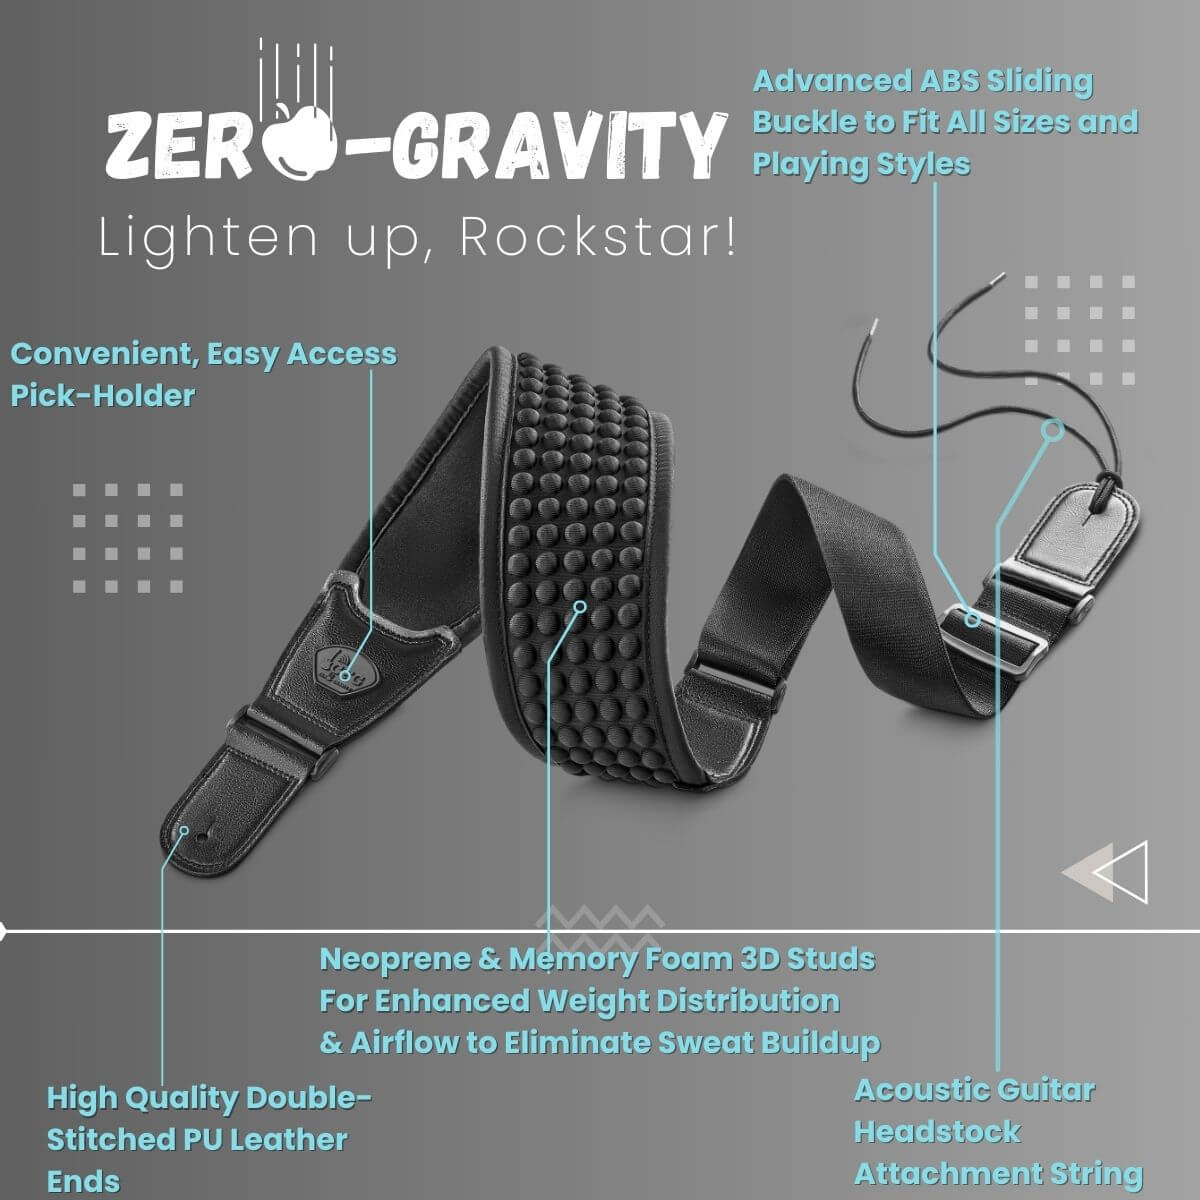 This is an image of the Zero Gravity Strap from CFG - Cable Free Guitar. The strap is designed to lighten the load for musicians, featuring a black neoprene and memory foam construction with 3D studs for enhanced weight distribution and improved airflow to eliminate sweat buildup. Key features are highlighted, such as the convenient, easy-access pick-holder, advanced ABS sliding buckle that adjusts to fit all sizes and playing styles, high-quality double-stitched PU leather ends, and an acoustic guitar headstock attachment string. The background is dark with light text, emphasizing the product's features in a sleek, modern design.